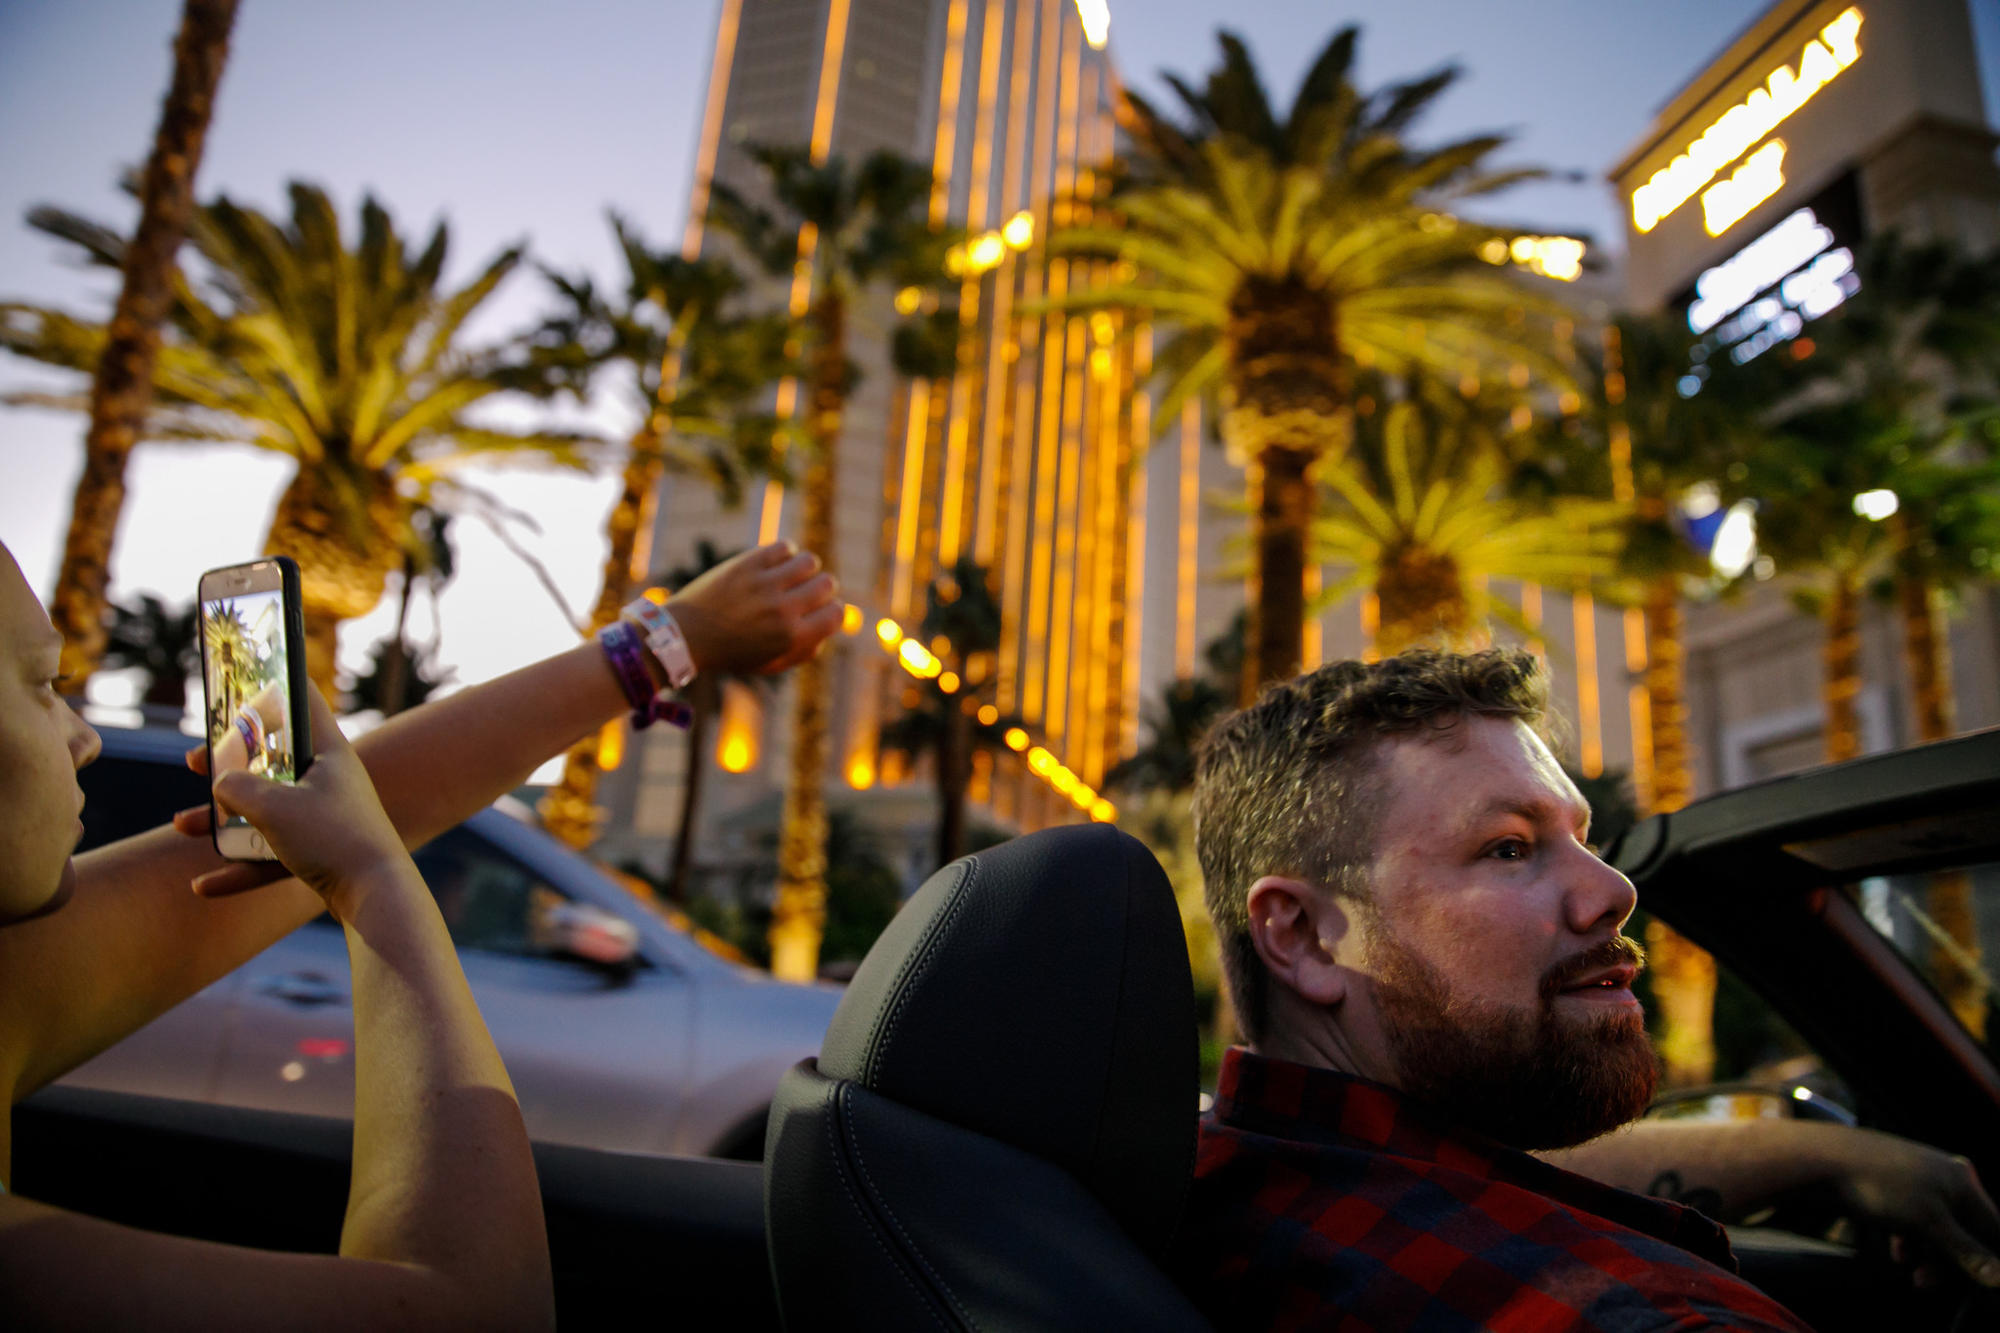 Brian MacKinnon drives through Las Vegas in the days after the shooting.